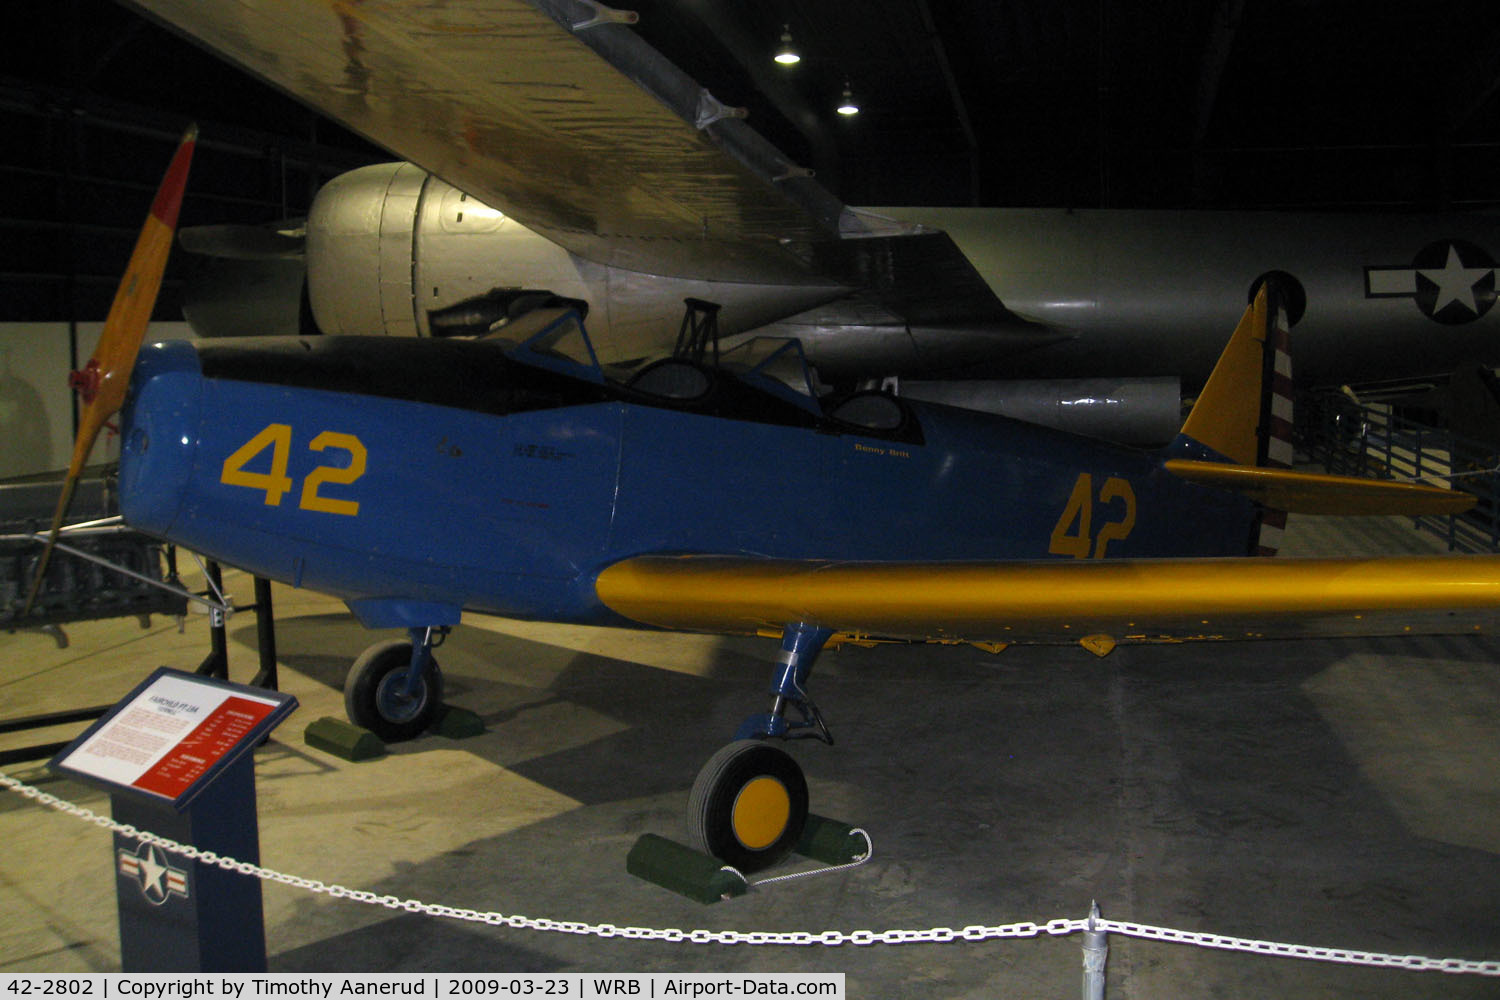 42-2802, 1942 Fairchild PT-19A C/N Not found 42-2802, Museum of Aviation, Robins AFB